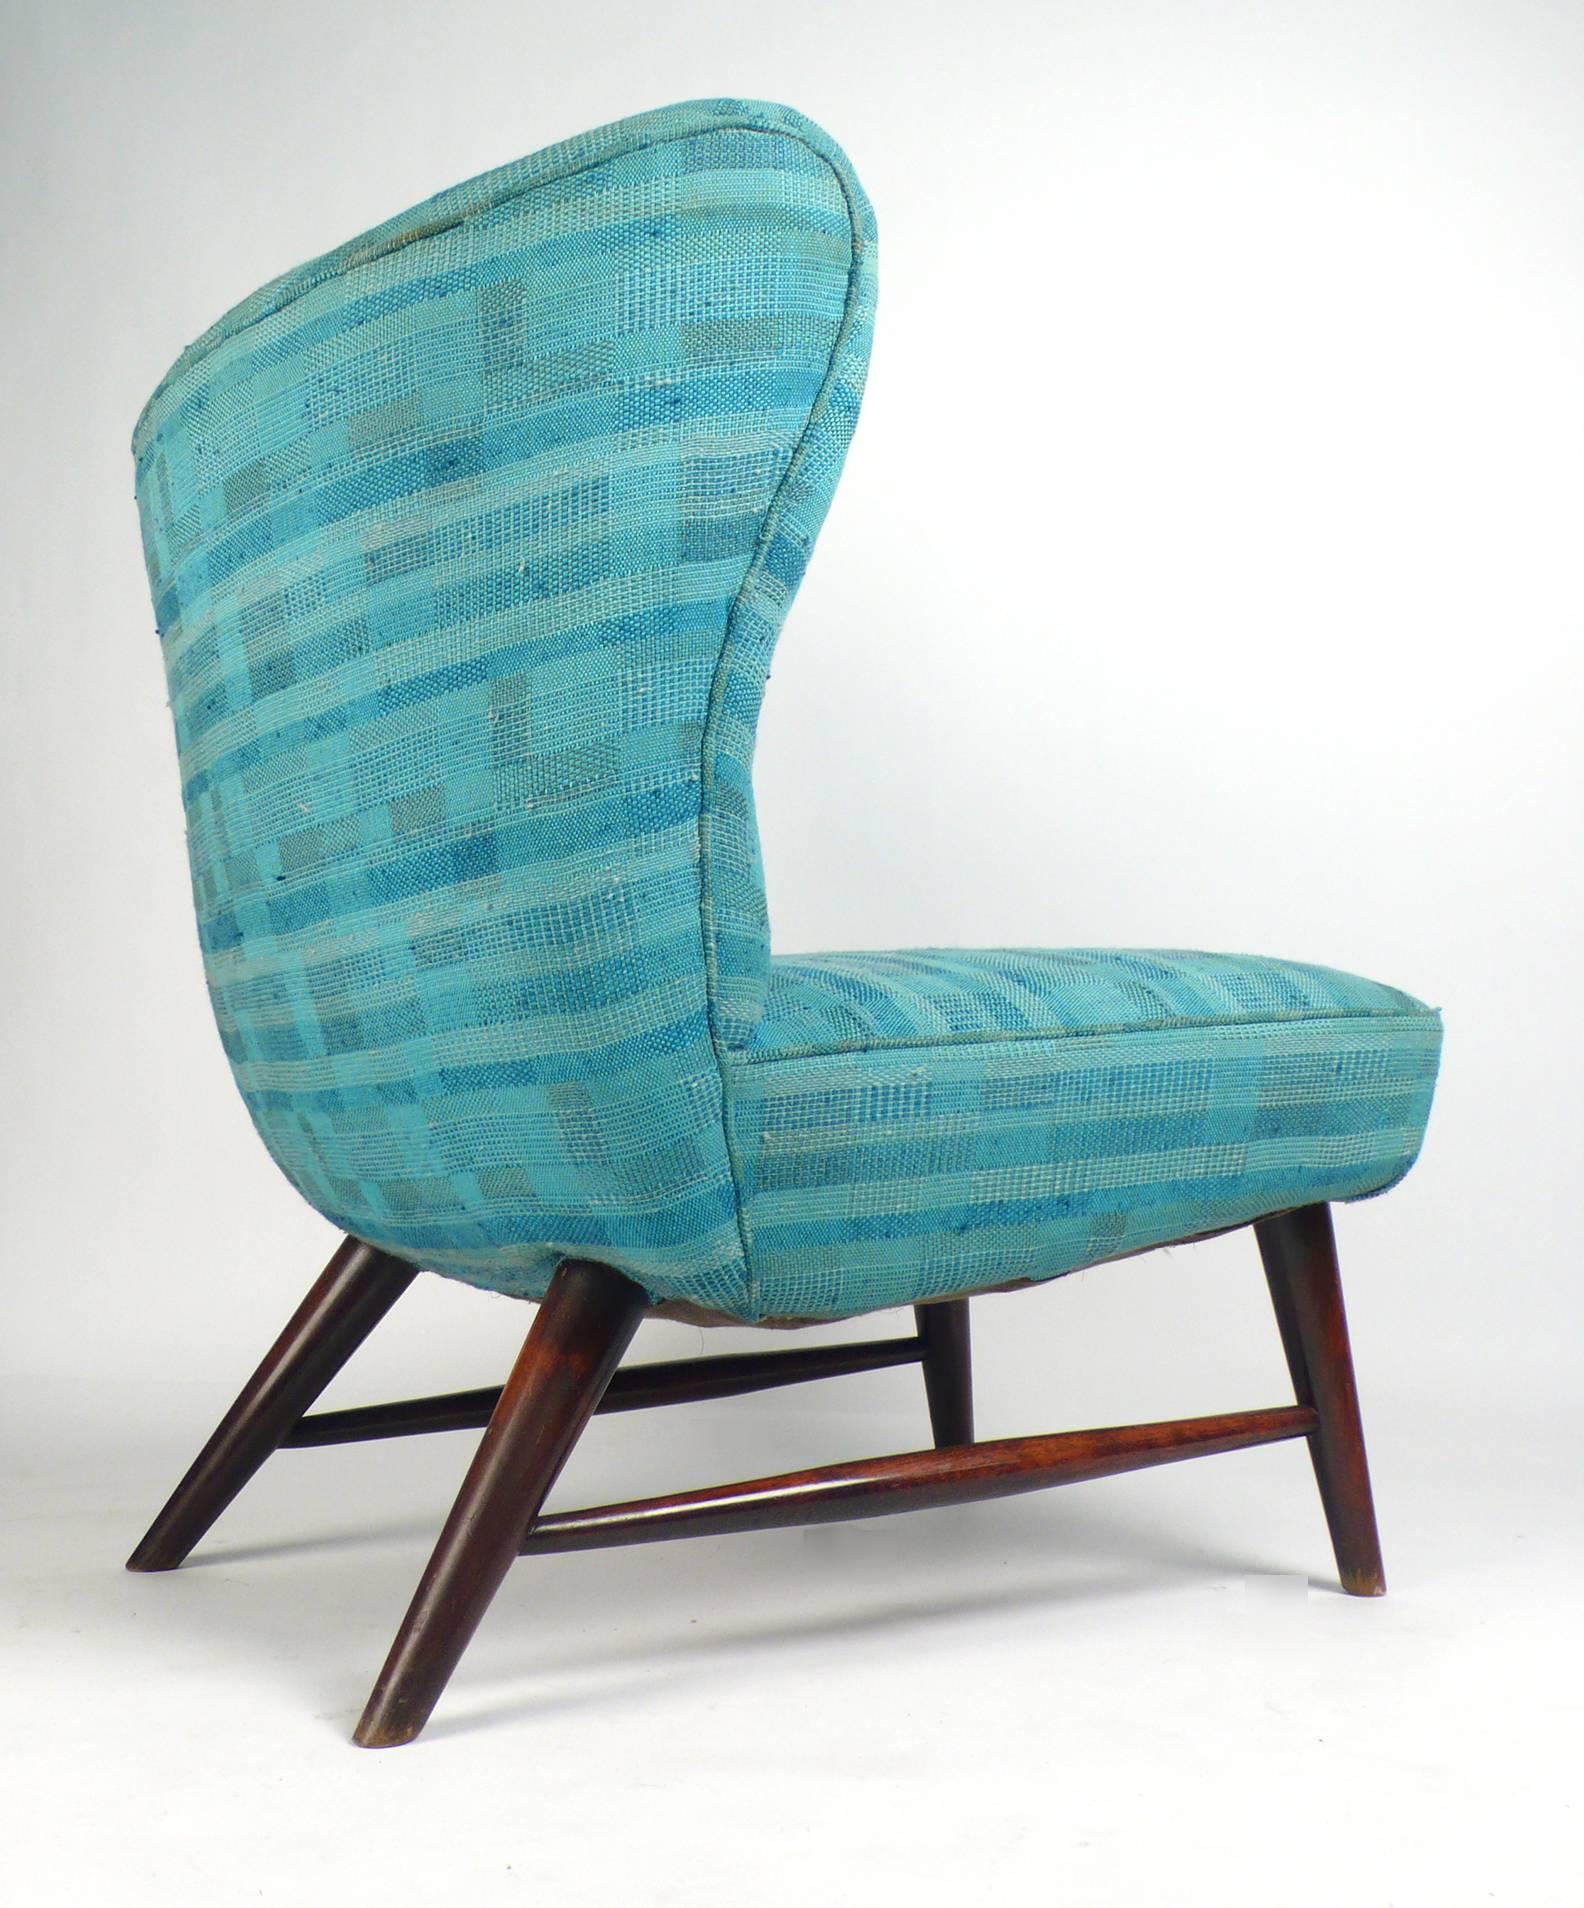 201 Armless Chair by Elias Svedberg In Good Condition For Sale In Dallas, TX